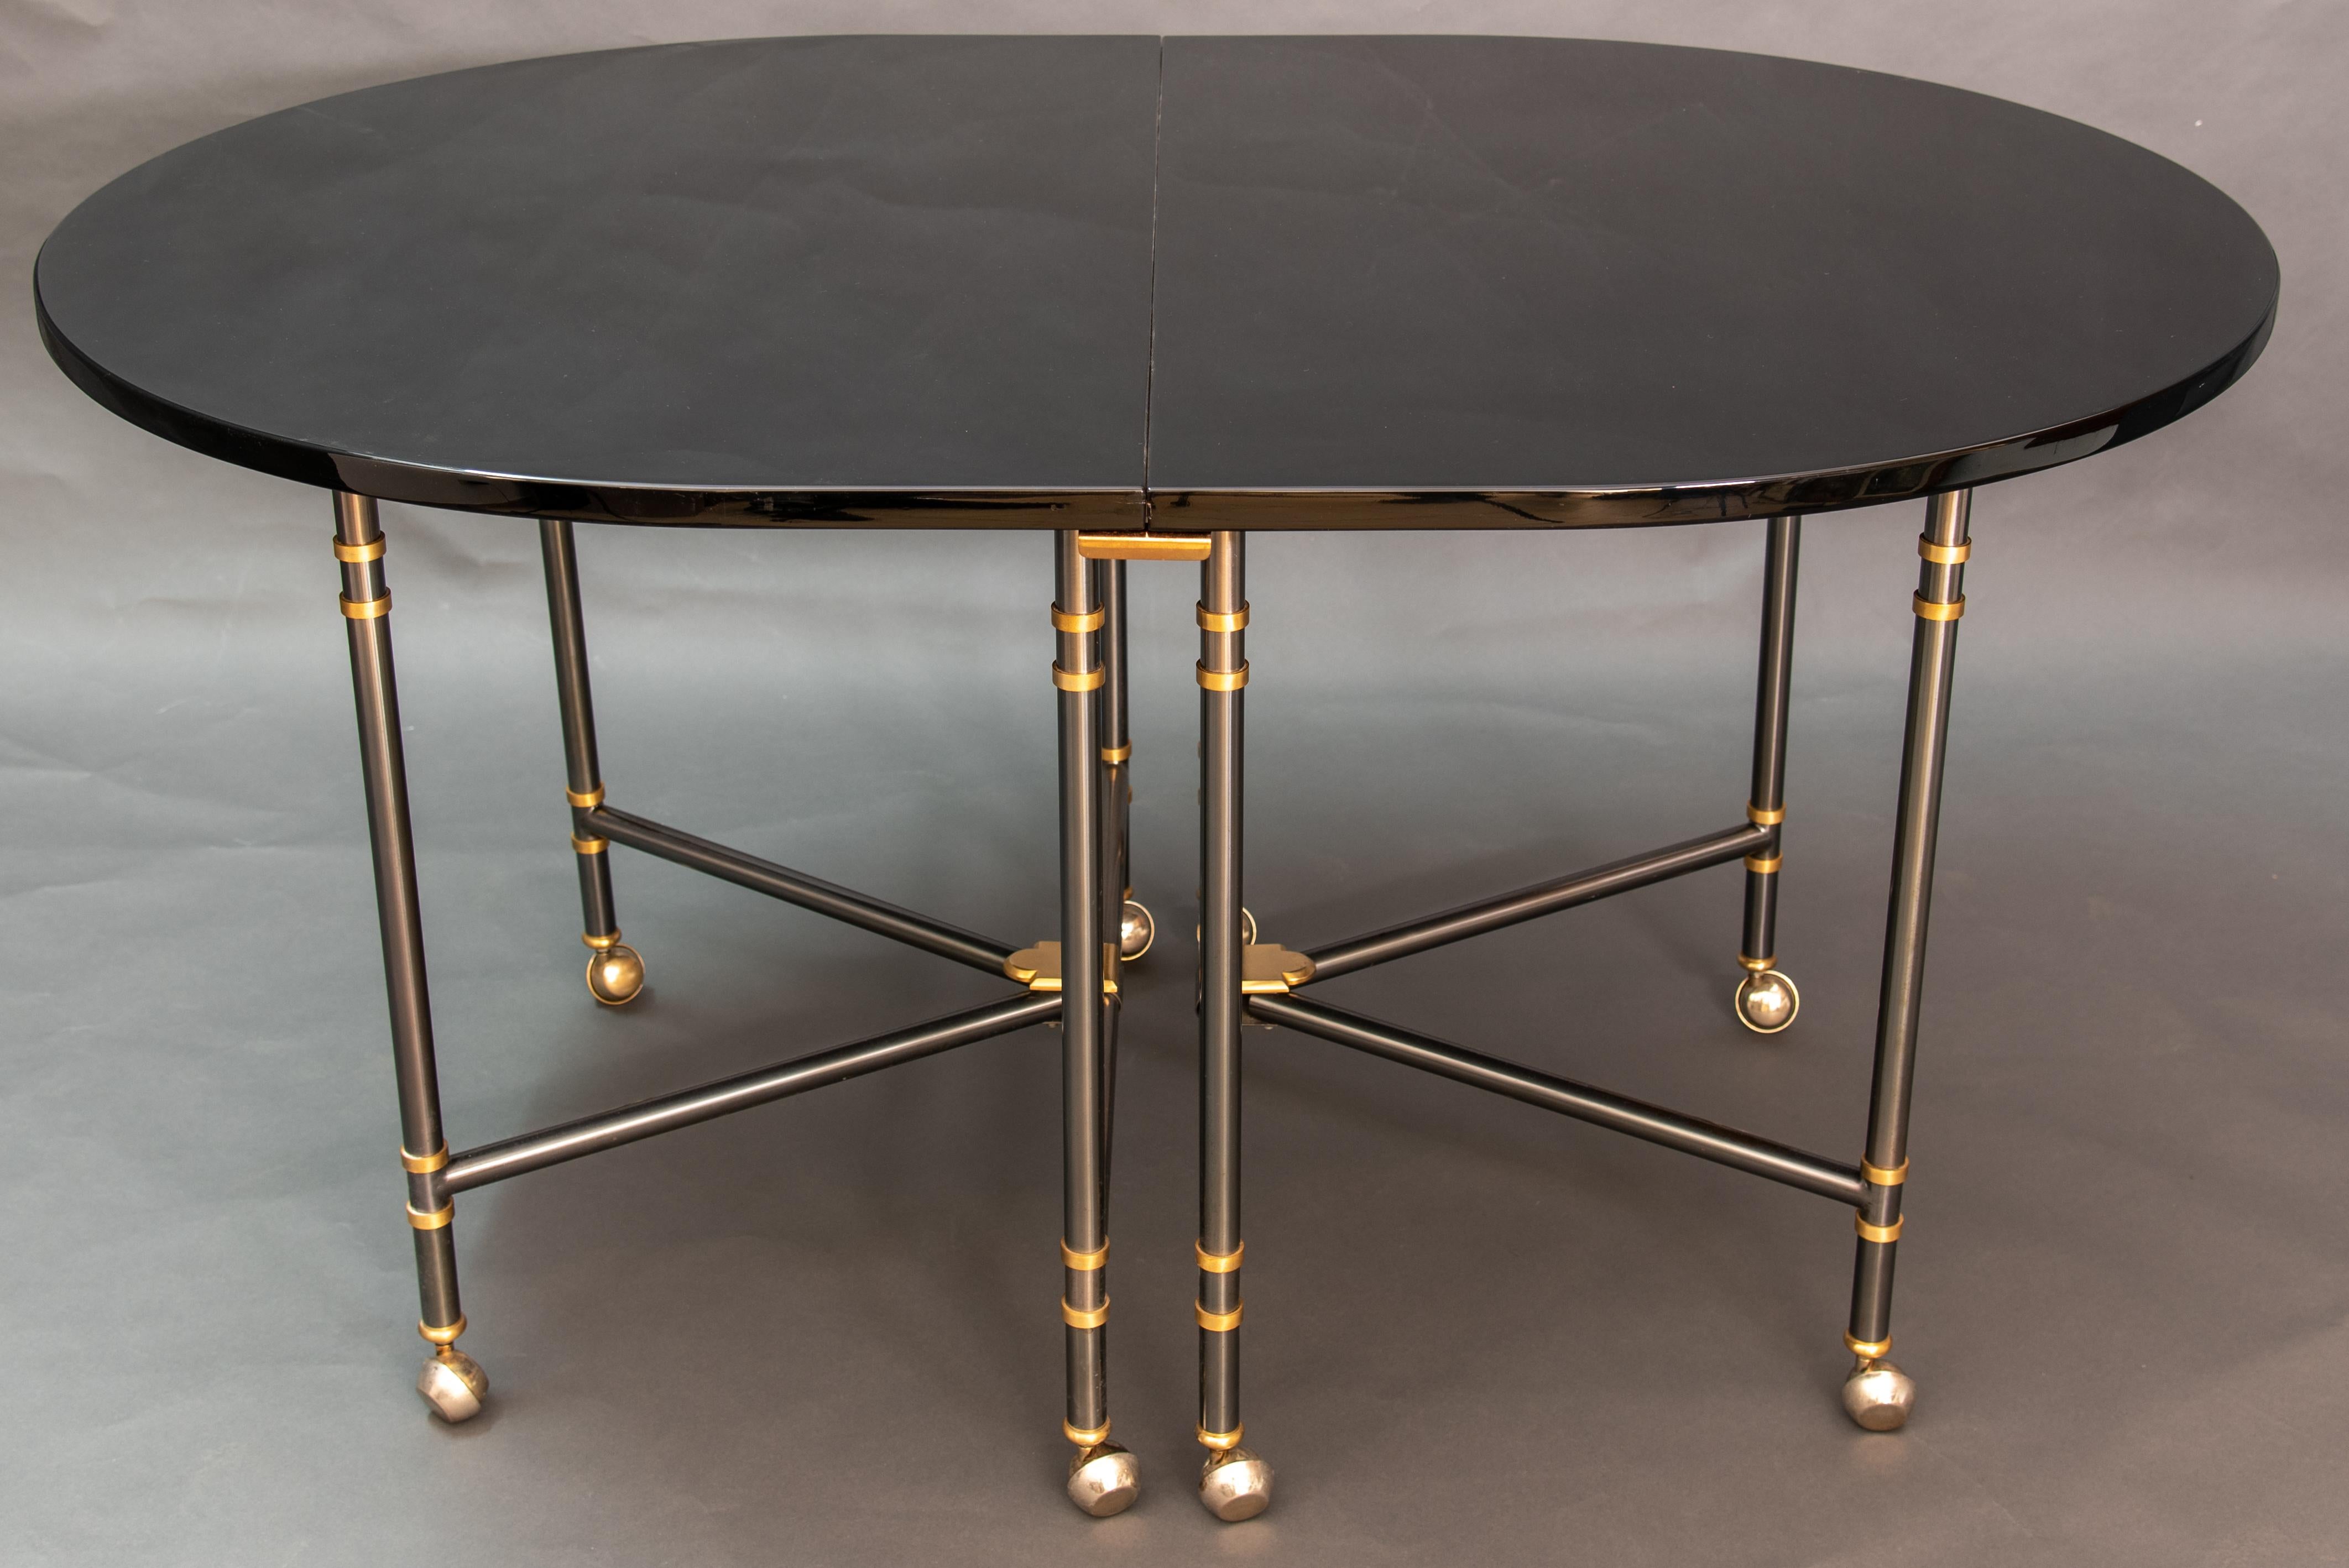 Maison Jansen Oval Black Lacquered France Dining Table Royal Model 2